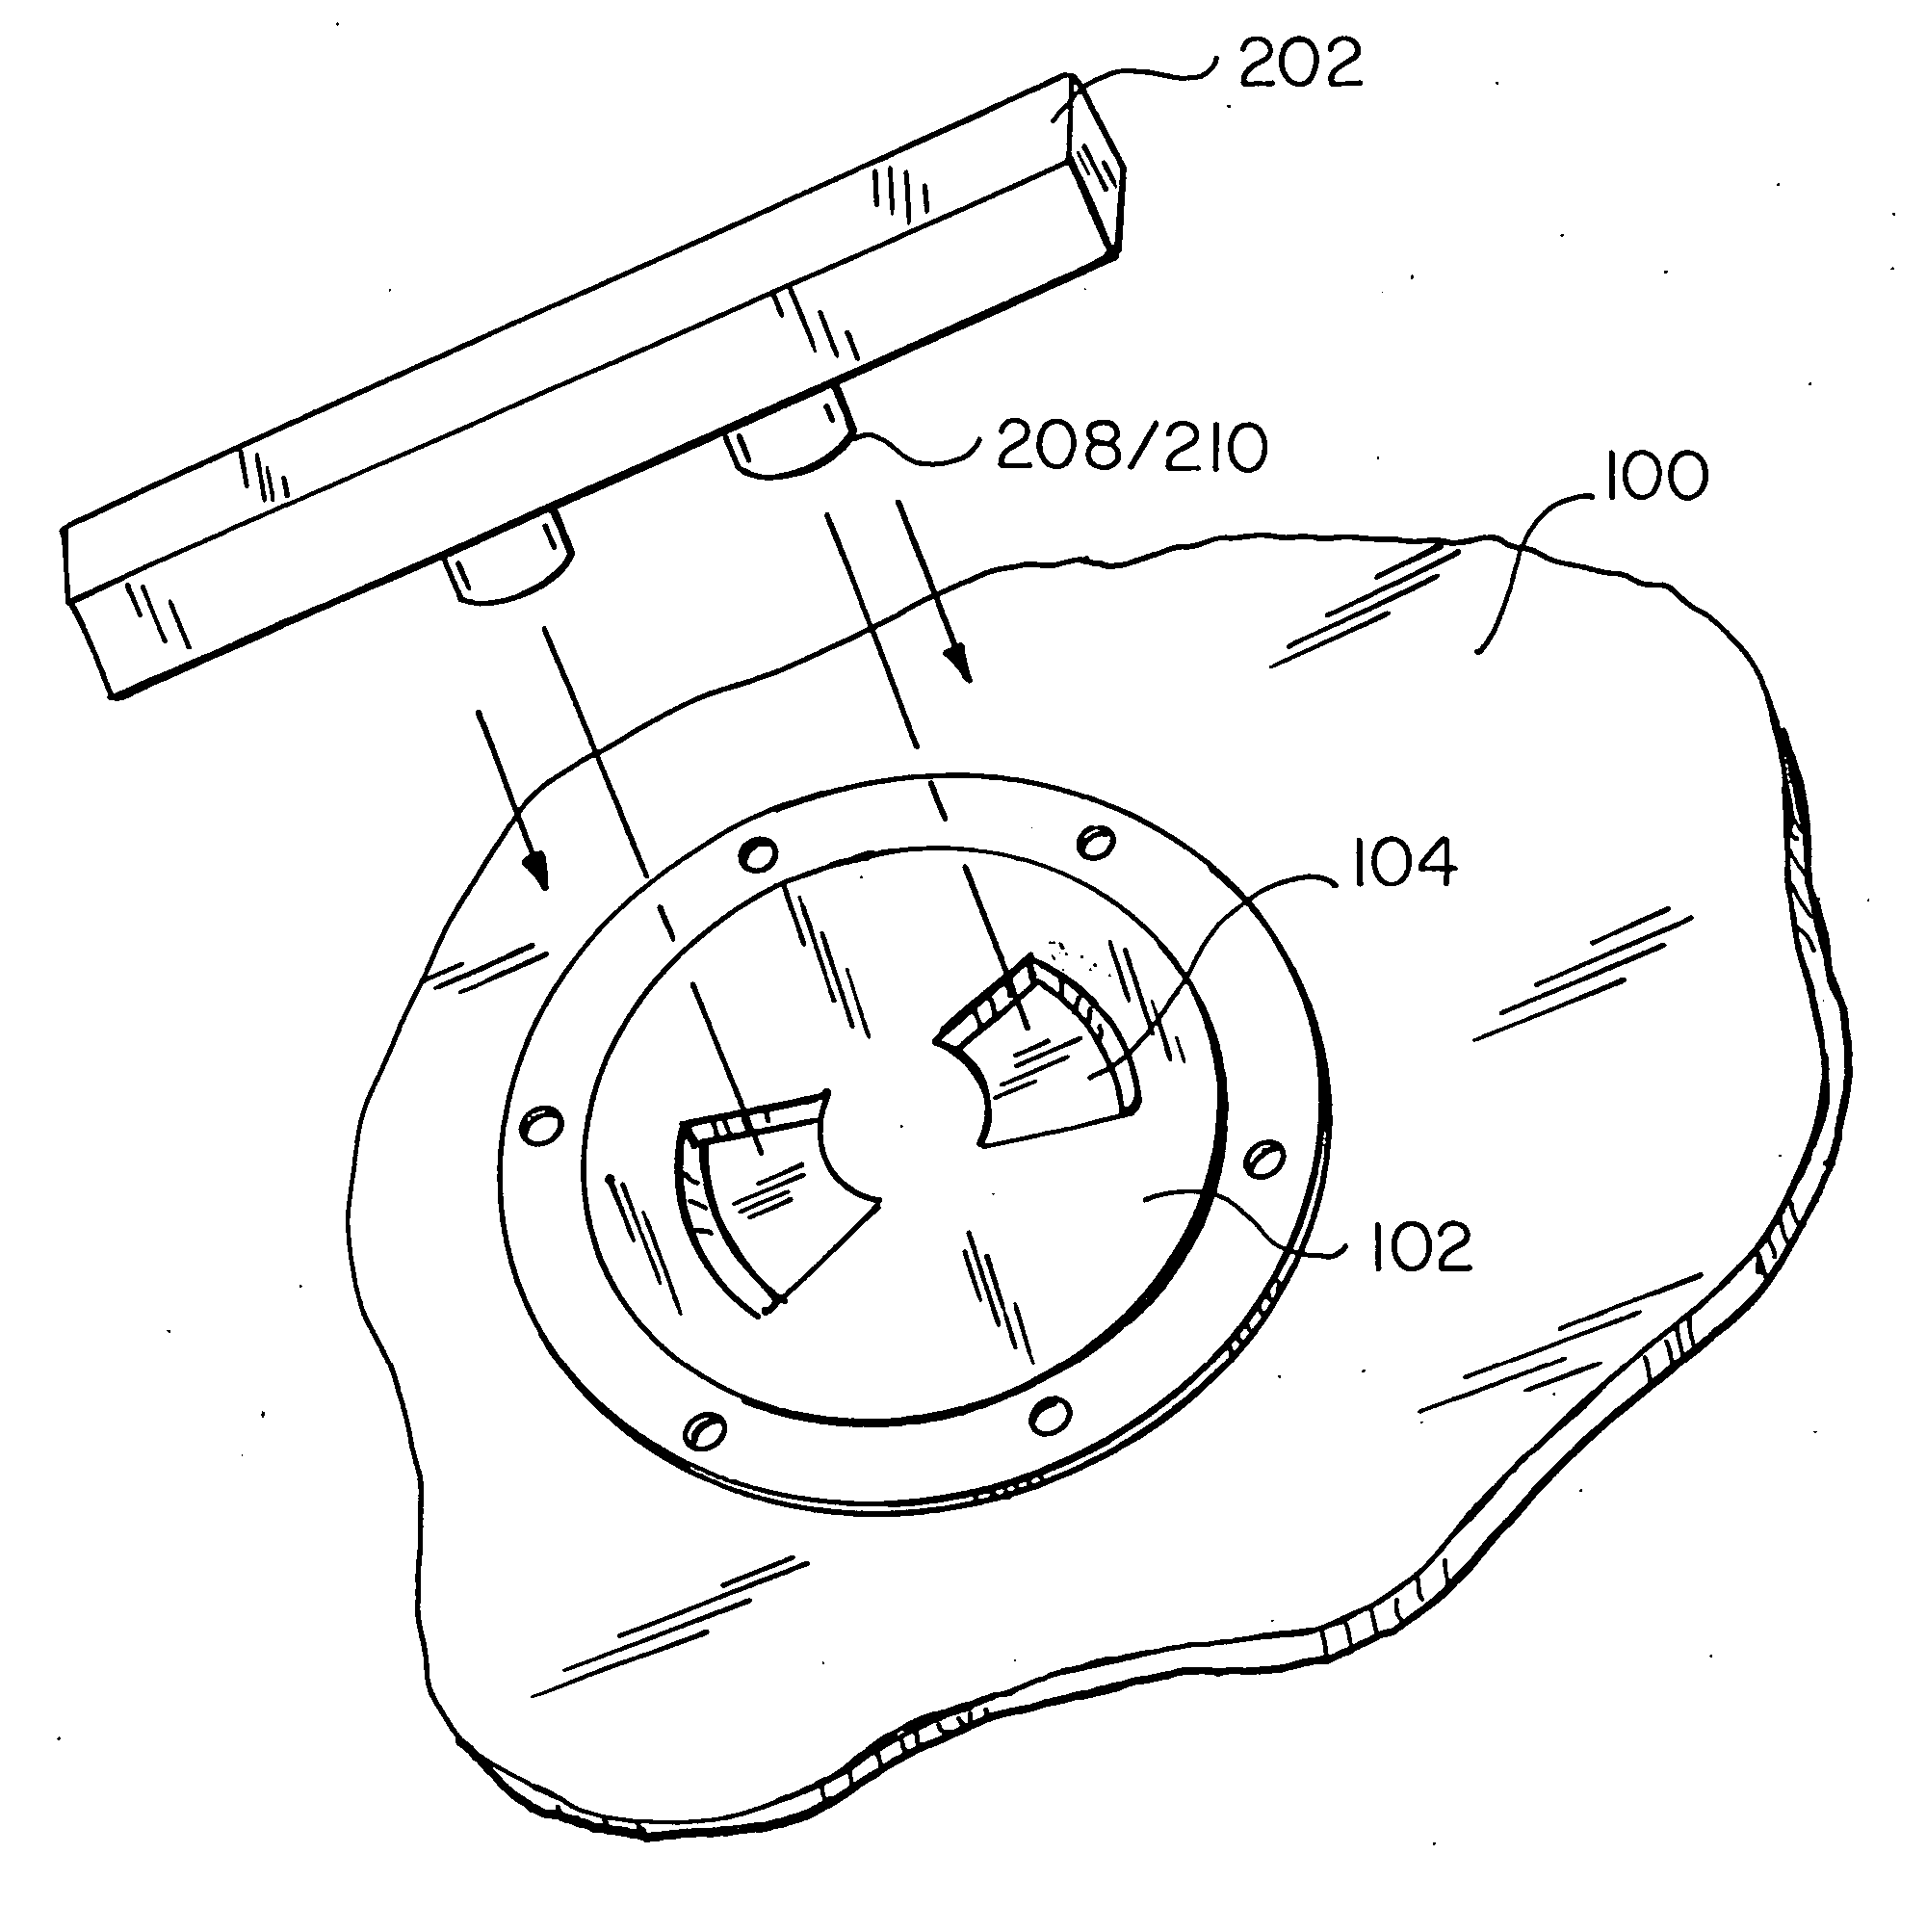 Cover plate removal tool